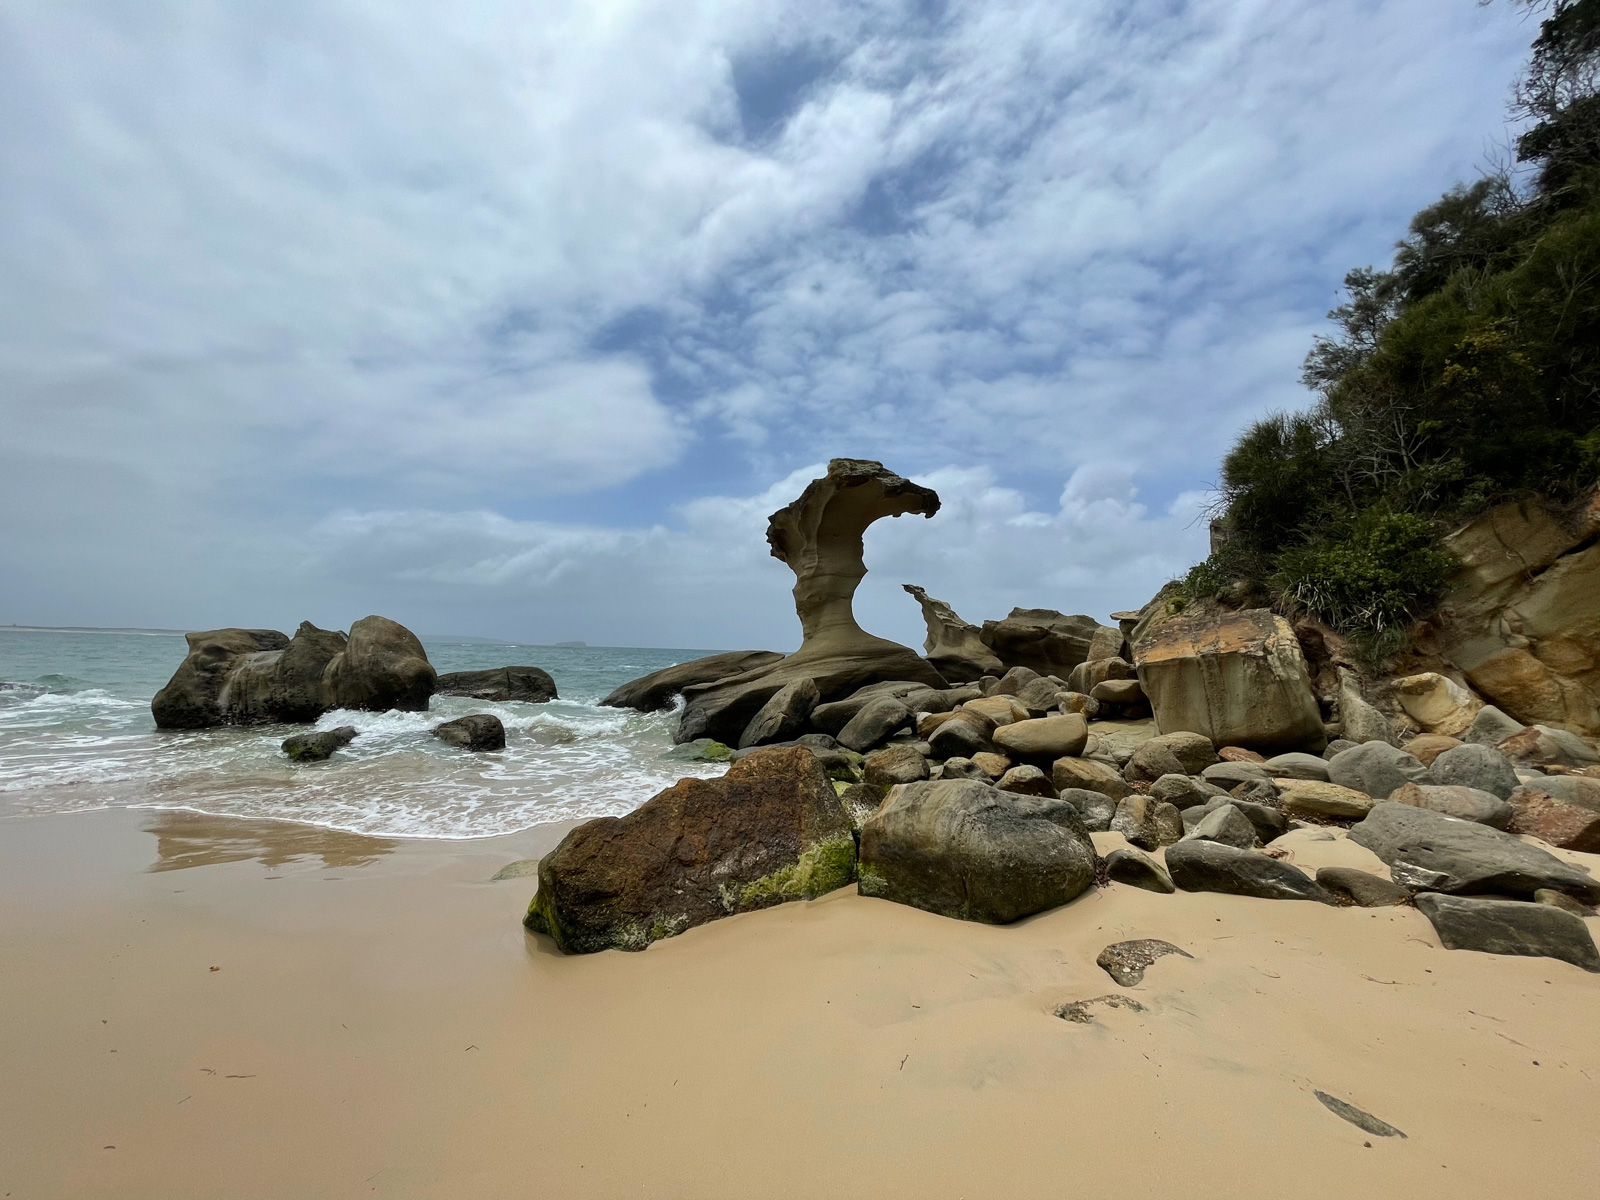 The view on a beach with some large rocks and a rock formation, one of which resembles a big wave. The sky is blue with a few clouds